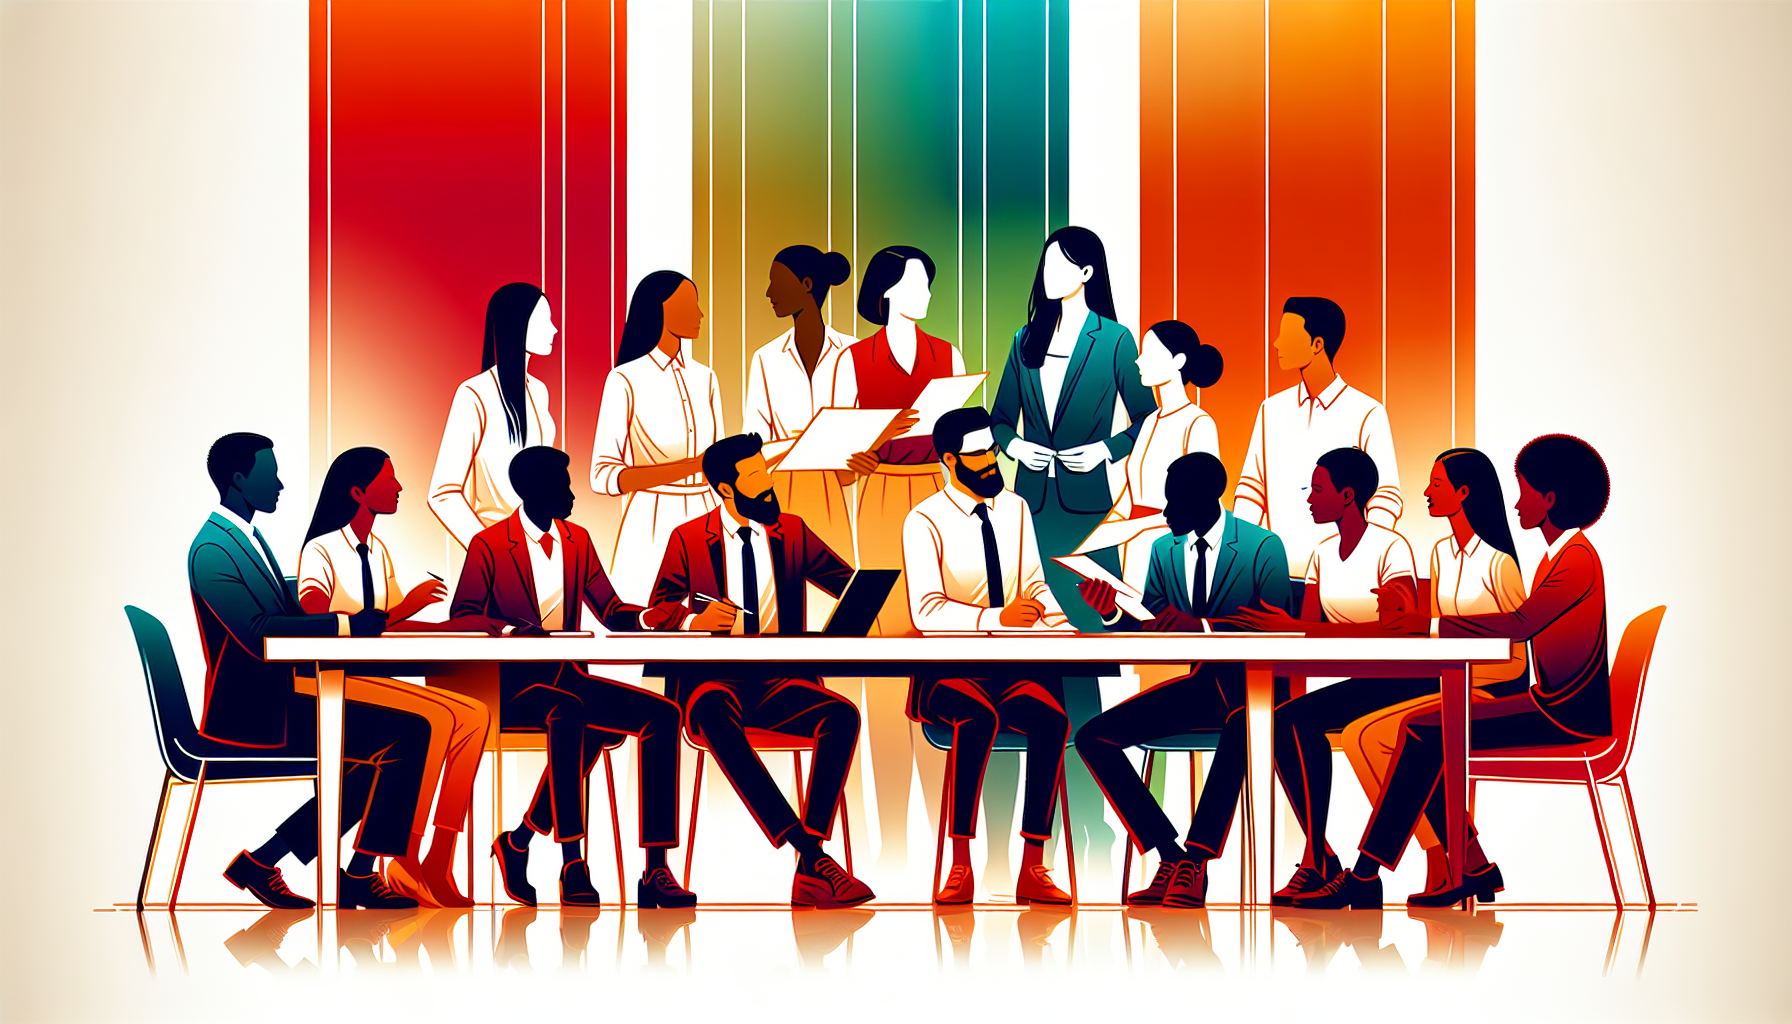 Show an image of a diverse group of individuals working together in a meeting, with one person leadi